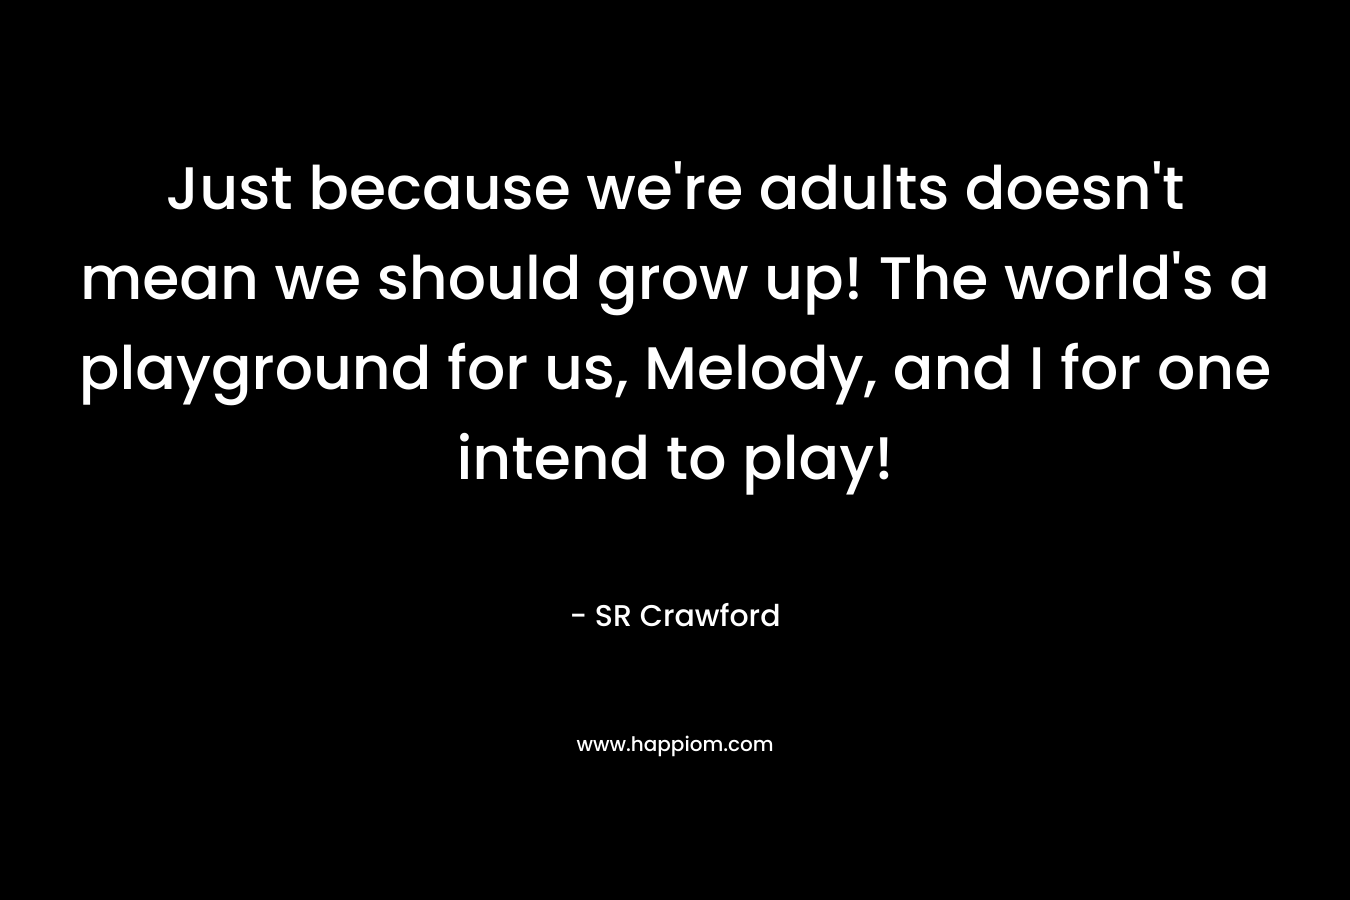 Just because we’re adults doesn’t mean we should grow up! The world’s a playground for us, Melody, and I for one intend to play! – SR Crawford